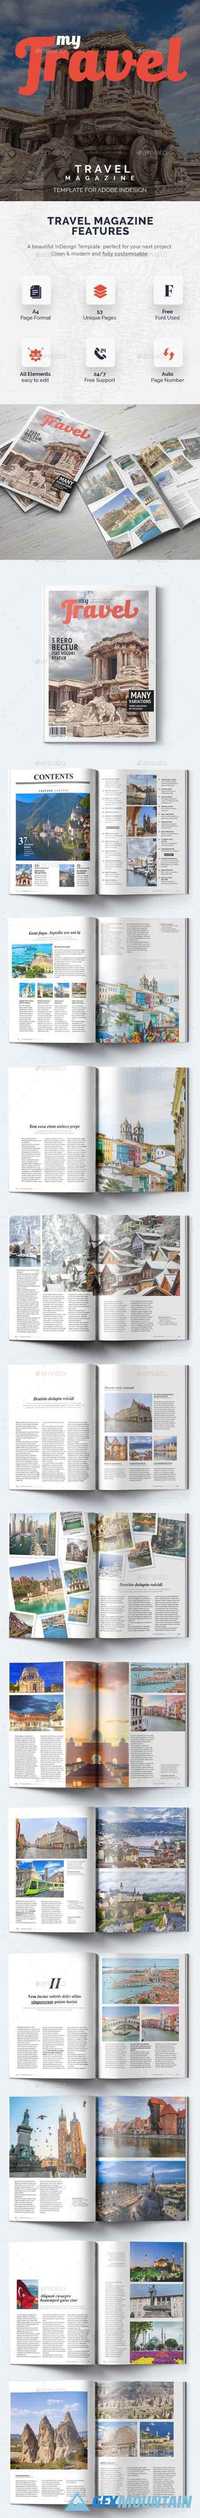 My Travel - 53 Pages Magazine Template 20087676